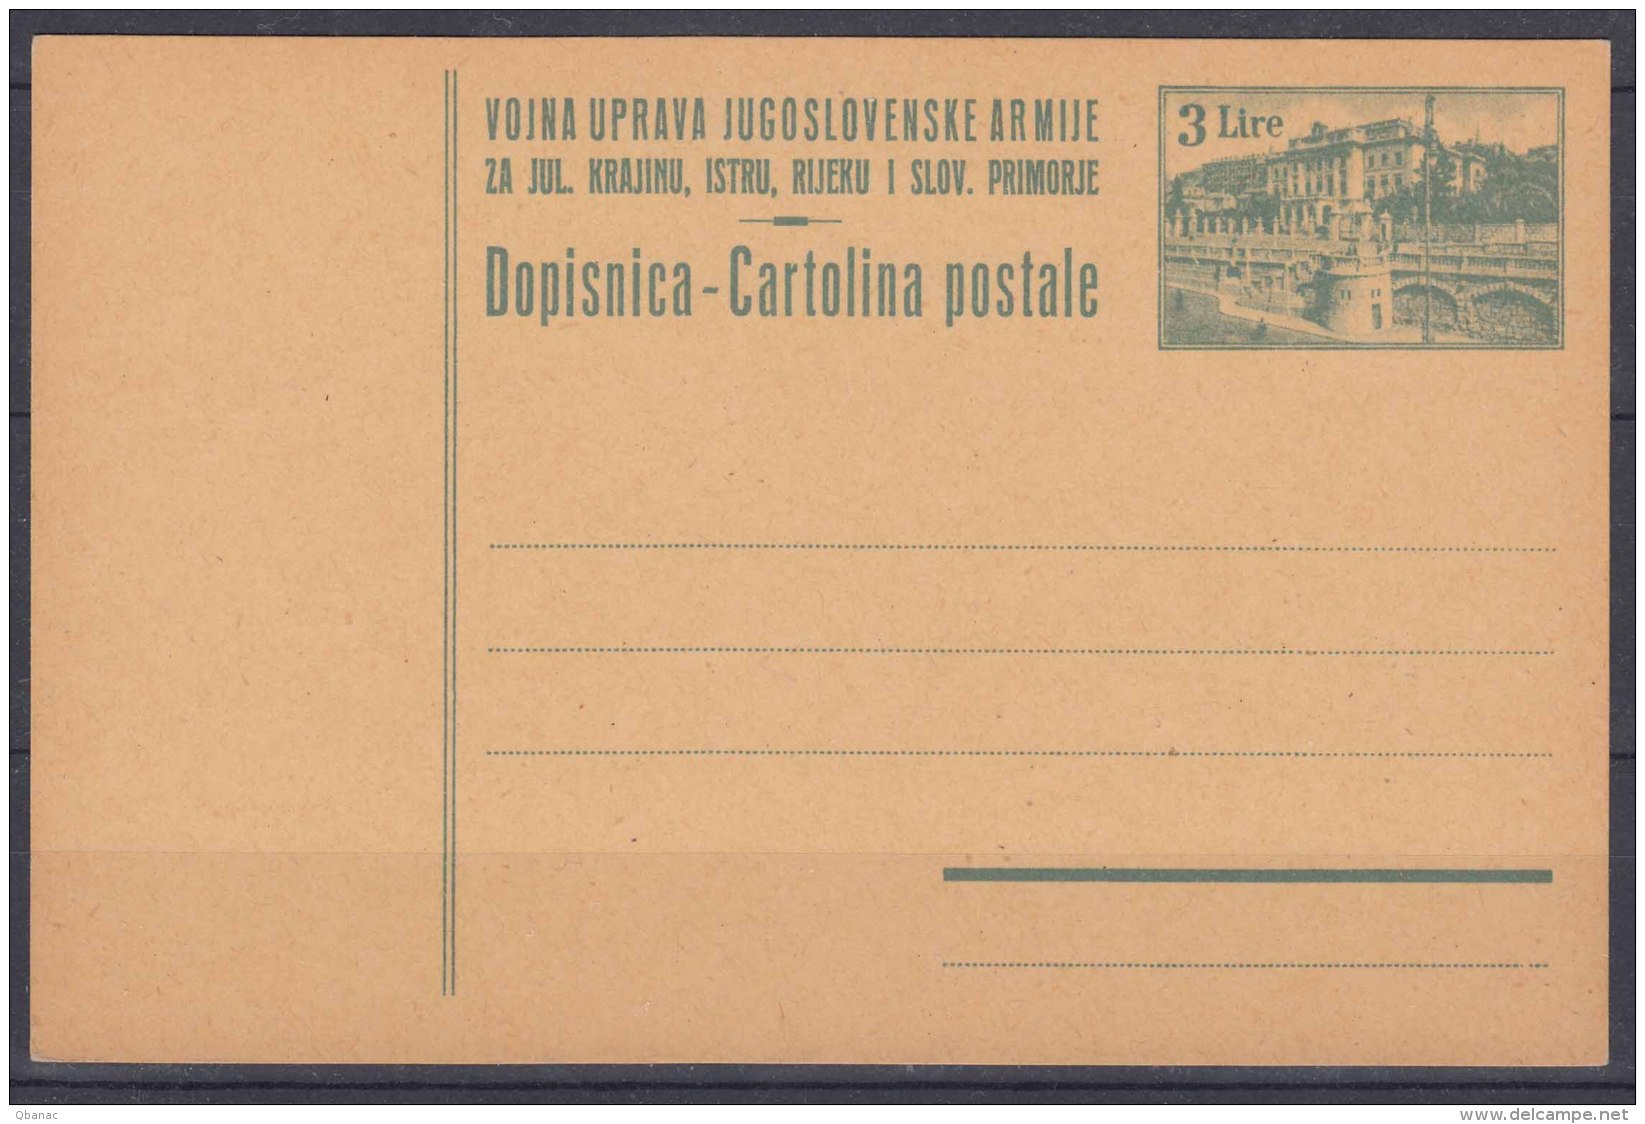 Yugoslavia Occ. Of Italy, Trieste Zone B, Postal Stationery Card In Rare Brown Cardboard Variety, Excellent Mint Cond. - Marcophilie